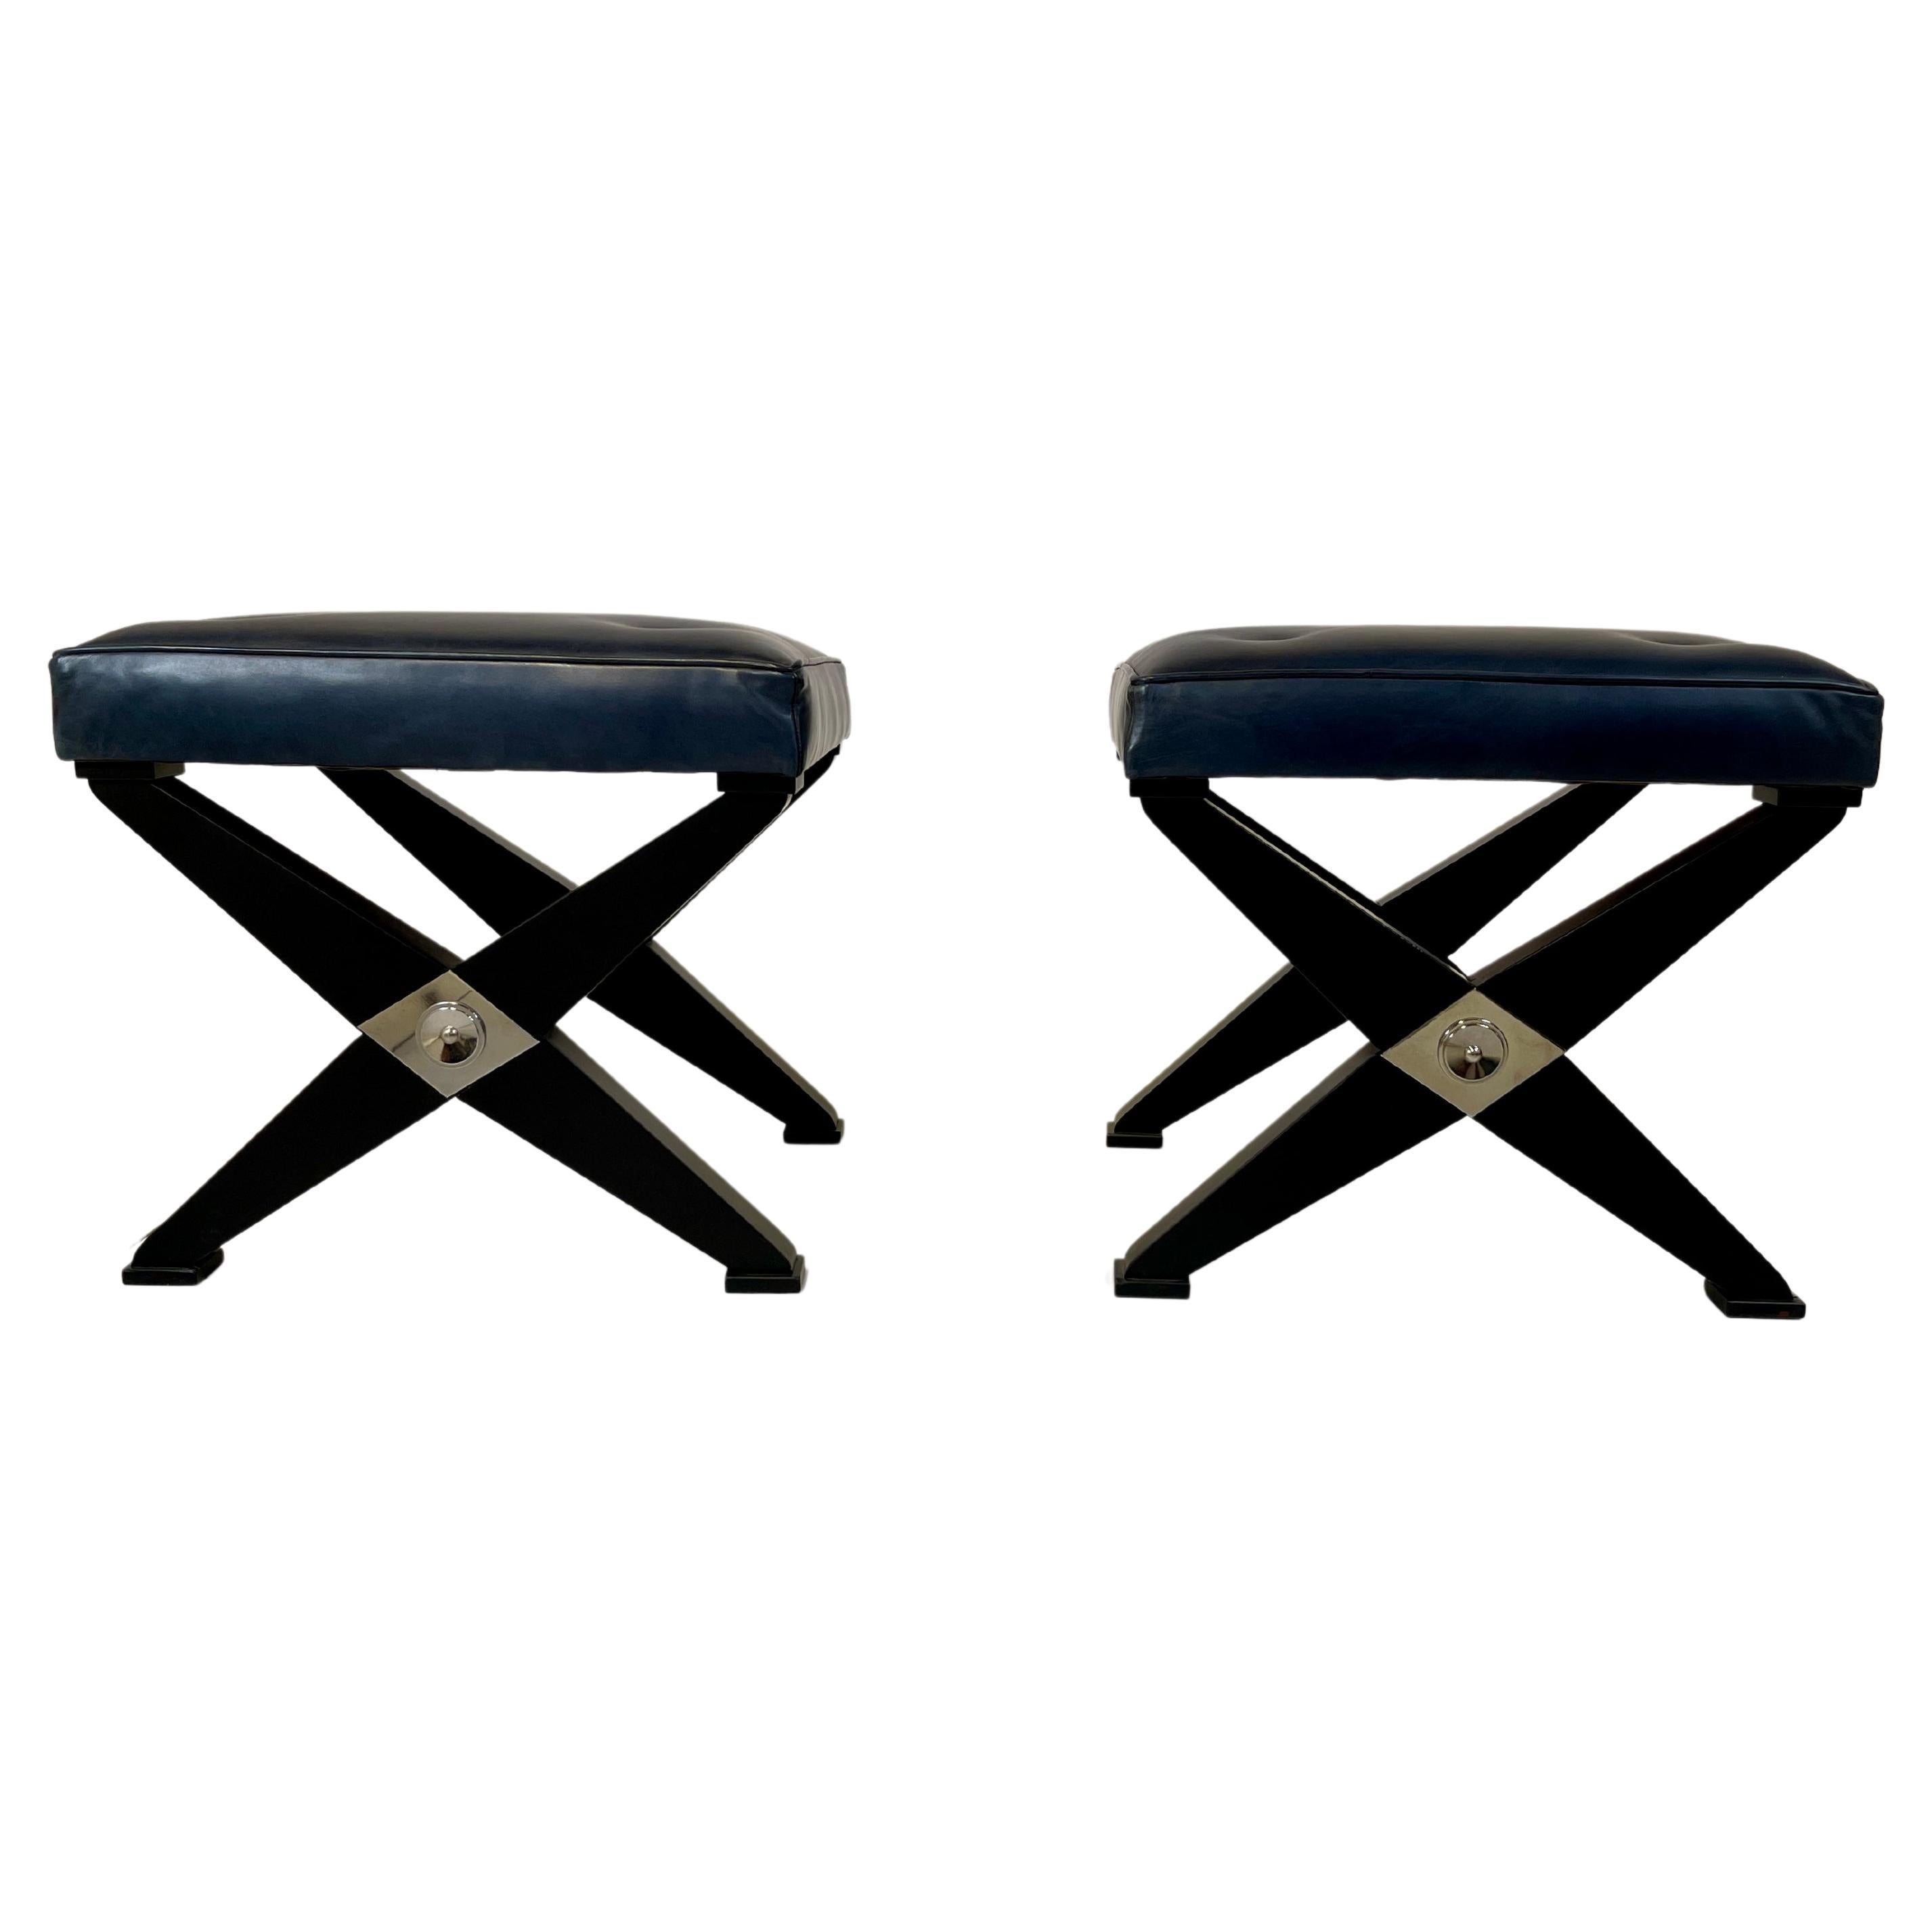 Pair of stools in black lacquered wood and blue leather